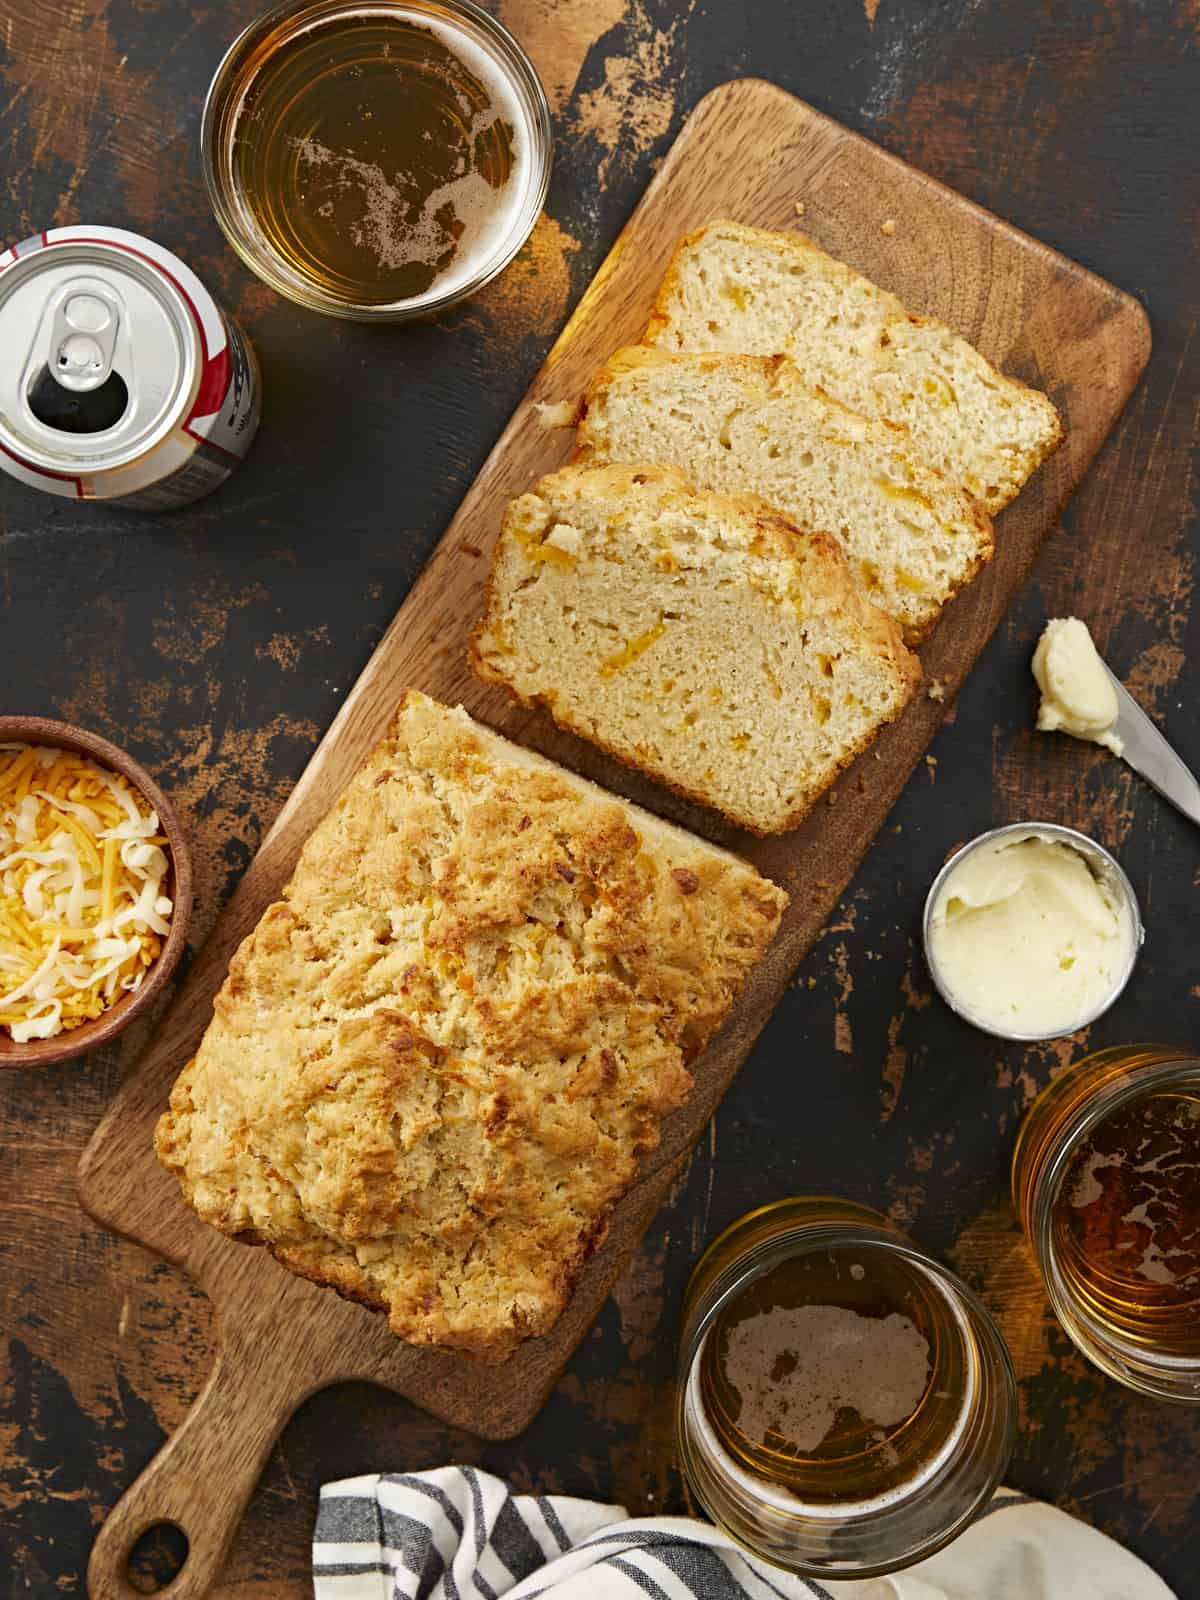 A loaf of beer bread with three slices overlapping on a long wooden cutting board surrounded by glass jars filled with beer, a PBR can, a wooden bowl of shredded cheese and a small metal dish of soft butter and a small butter knife.